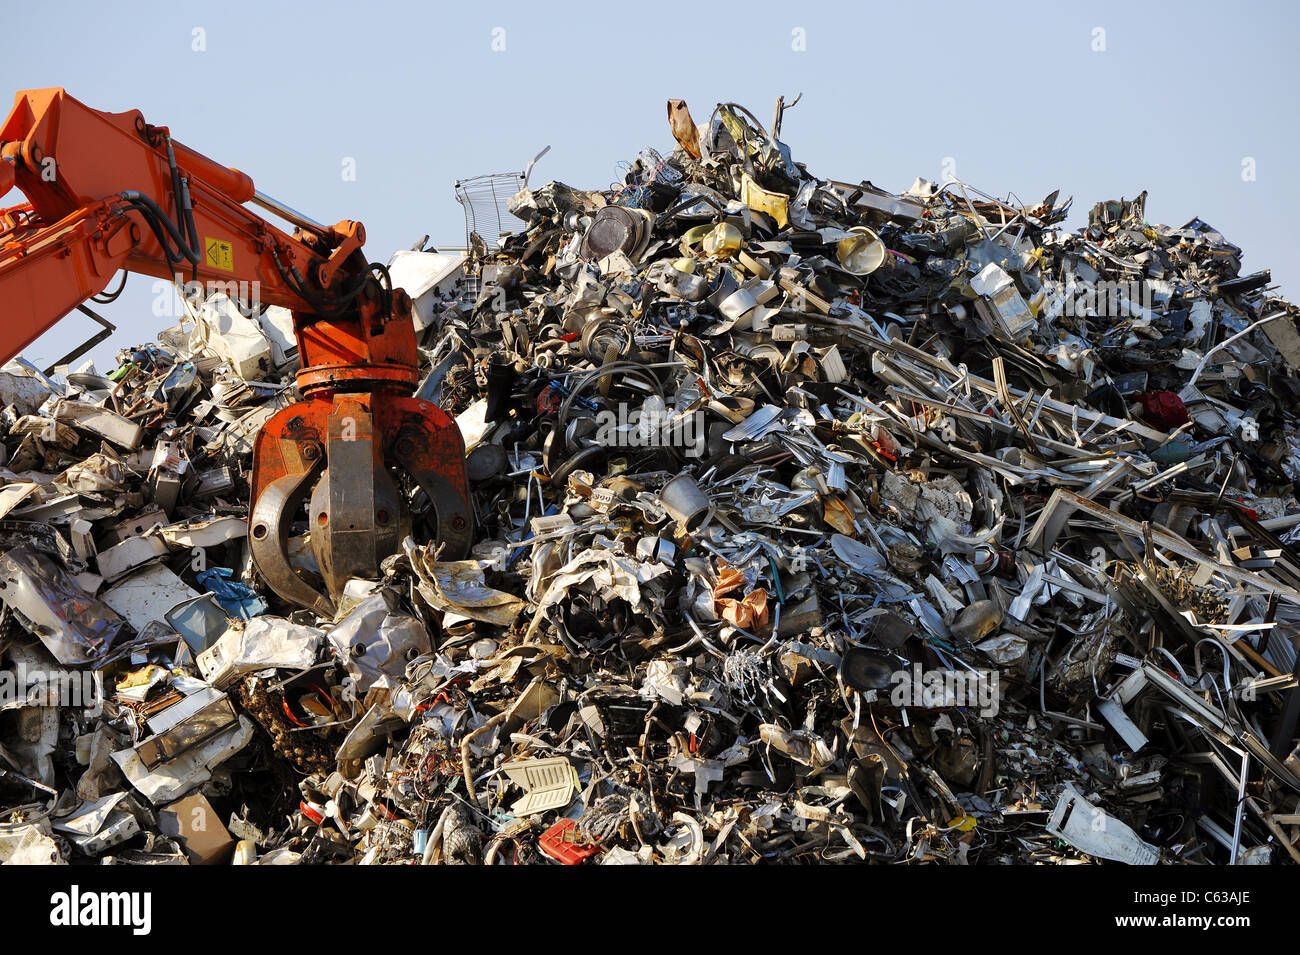 Crane grabber loading rusty scrap metal for recycling Stock Photo